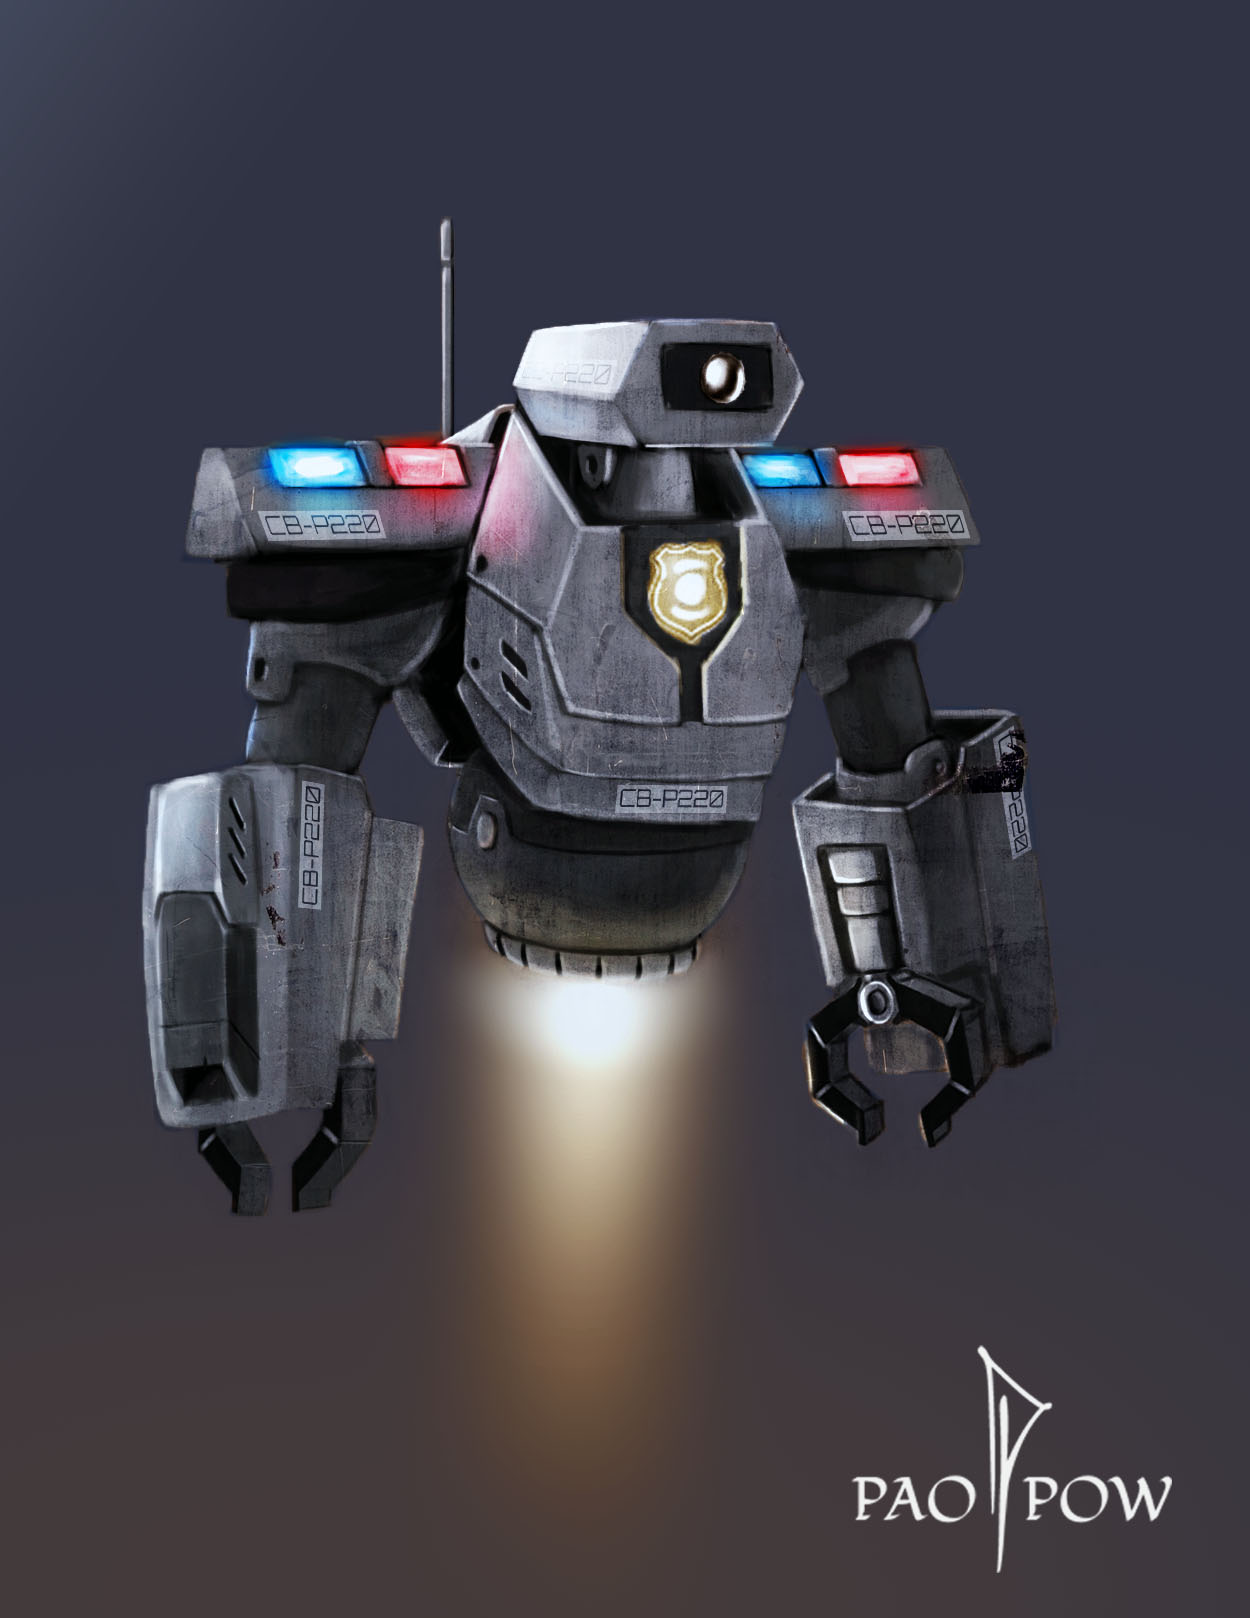 Copbot Chaaracter Design
  
  <p>CONCEPT:  Design a Robot cop that patrols floating cities for comic book story</p>
  <p>HOW DESIGN SOLVES PROBLEMS,: I used recognizable reference to help the robot look like a police bot: traffic camera for head, blue/red lights on shoulders. </p>
  <p>PROCESS: research, digital sketching, and refining</p>
  <p>TOOLS USED: Photoshop</p>
  <p>CHALLENGES: Keeping the design interesting and understandable, yet simple enough so redrawing the character in comic book won't be too difficult.</p>
  